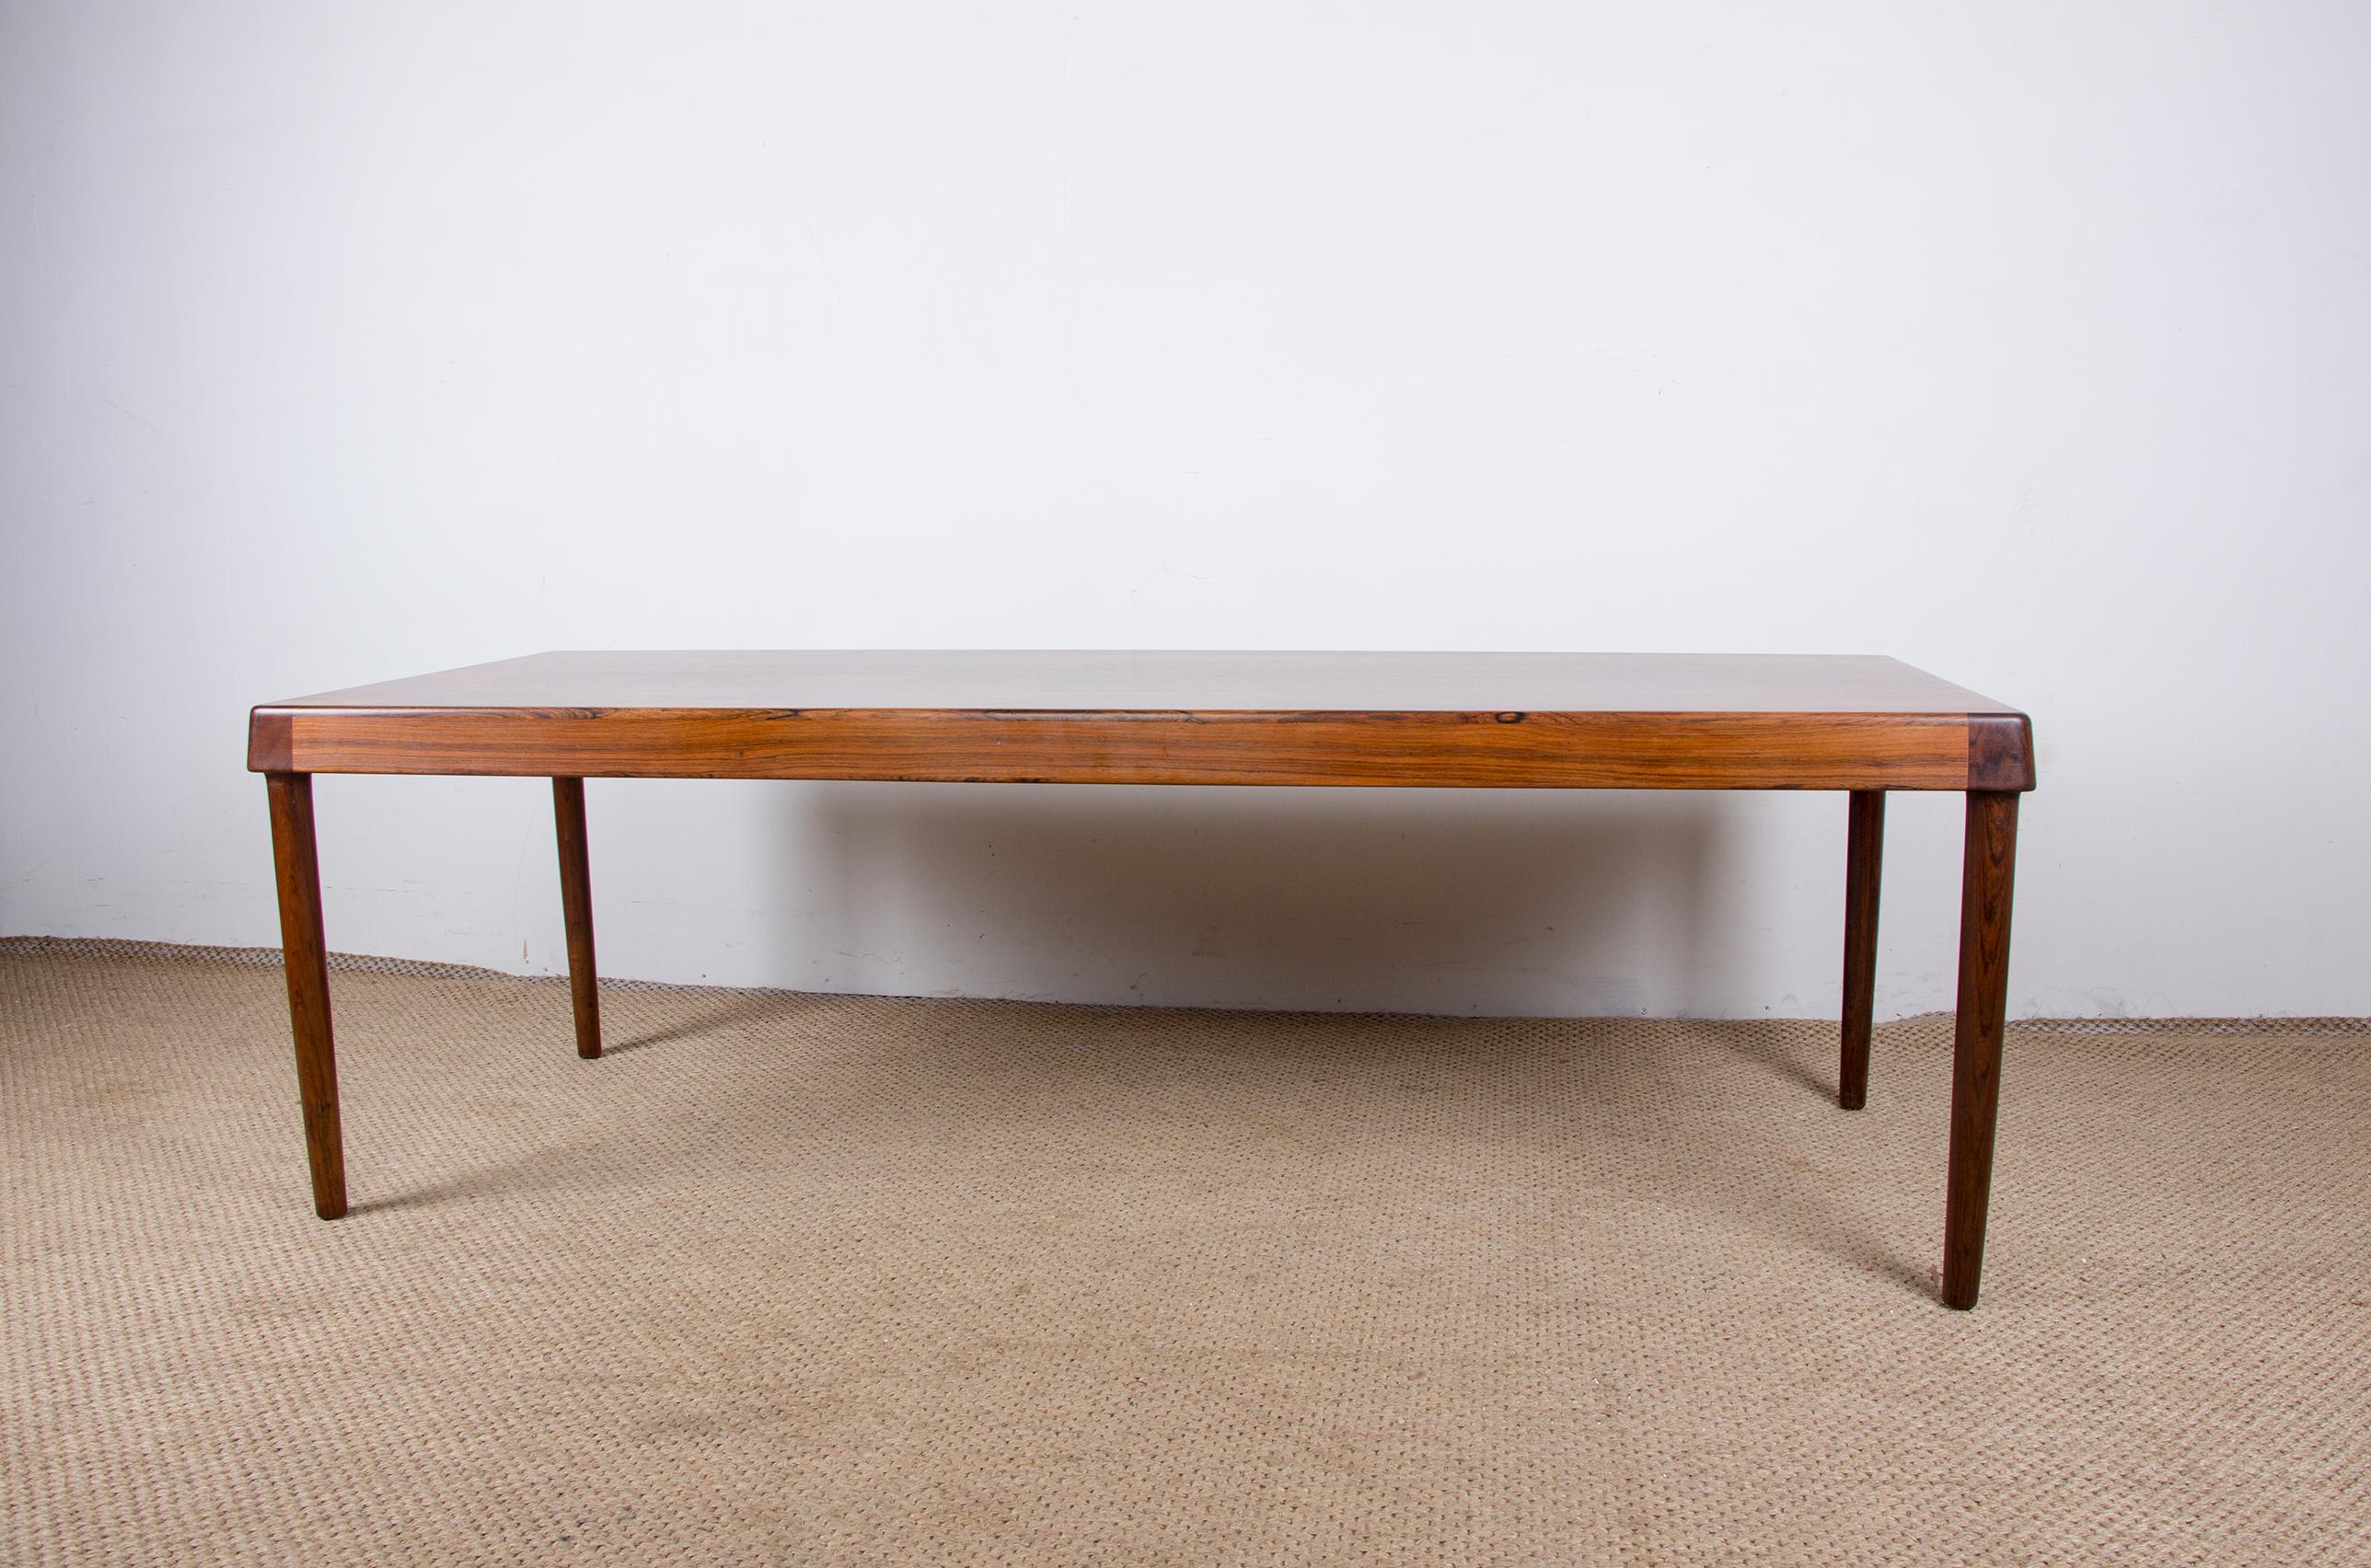 Superb Scandinavian coffee table. Very refined design and superb manufacturing quality. Very nice piece of furniture.